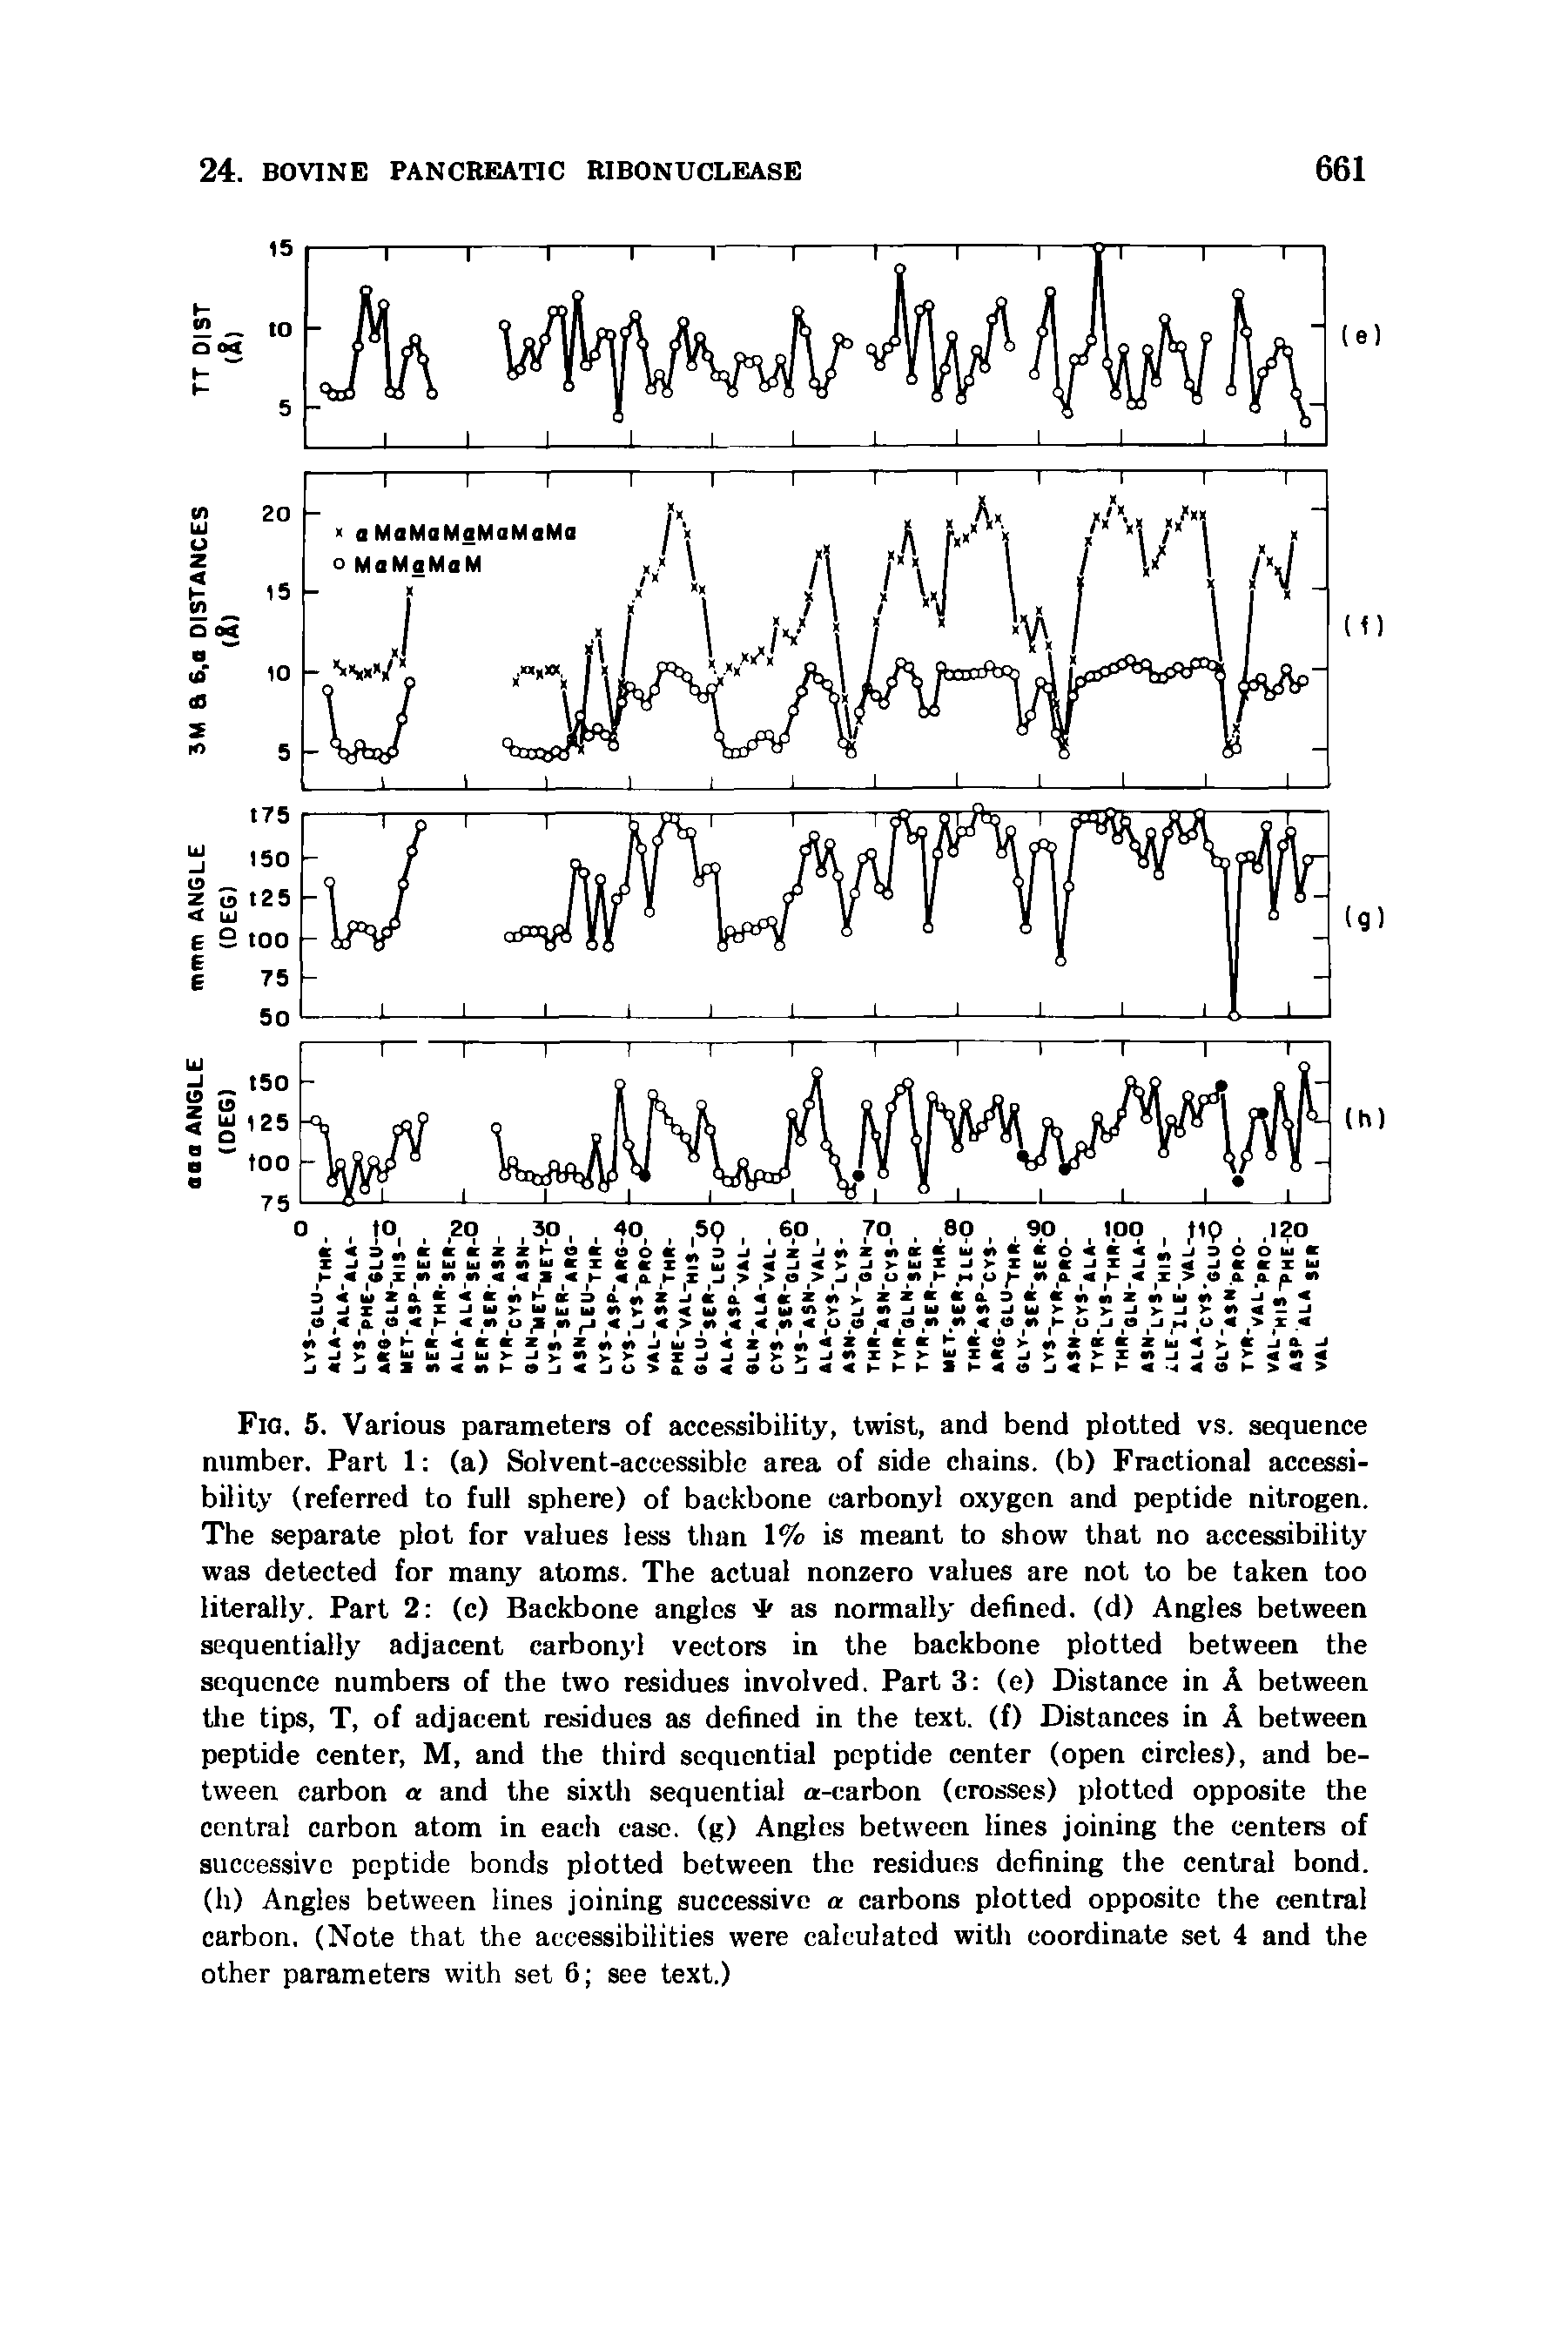 Fig. 5. Various parameters of accessibility, twist, and bend plotted vs. sequence number. Part 1 (a) Solvent-accessible area of side chains, (b) Fractional accessibility (referred to full sphere) of backbone carbonyl oxygen and peptide nitrogen. The separate plot for values less than 1% is meant to show that no accessibility was detected for many atoms. The actual nonzero values are not to be taken too literally. Part 2 (c) Backbone angles as normally defined, (d) Angles between sequentially adjacent carbonyl vectors in the backbone plotted between the sequence numbers of the two residues involved. Part 3 (e) Distance in A between the tips, T, of adjacent residues as defined in the text, (f) Distances in A between peptide center, M, and the third sequential peptide center (open circles), and between carbon a and the sixth sequential a-carbon (crosses) plotted opposite the central carbon atom in each case, (g) Angles between lines joining the centers of successive peptide bonds plotted between the residues defining the central bond, (h) Angles between lines joining successive a carbons plotted opposite the central carbon, (Note that the accessibilities were calculated with coordinate set 4 and the other parameters with set 6 see text.)...